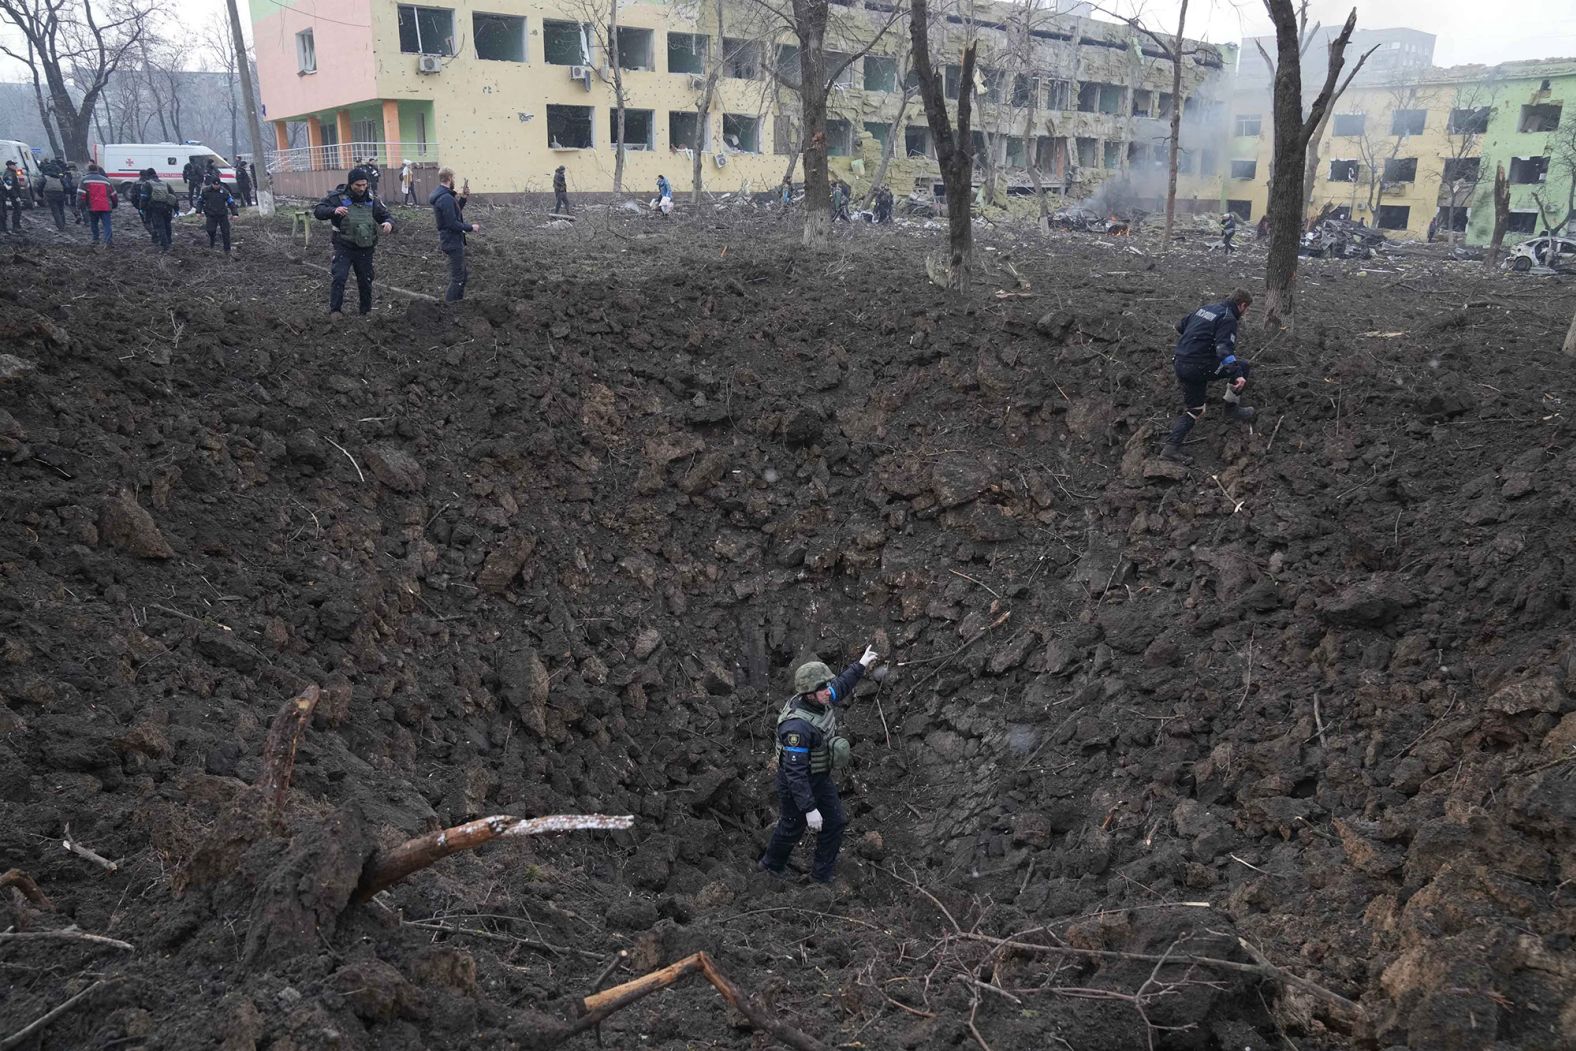 Ukrainian soldiers and emergency employees work at the site of the shelling.